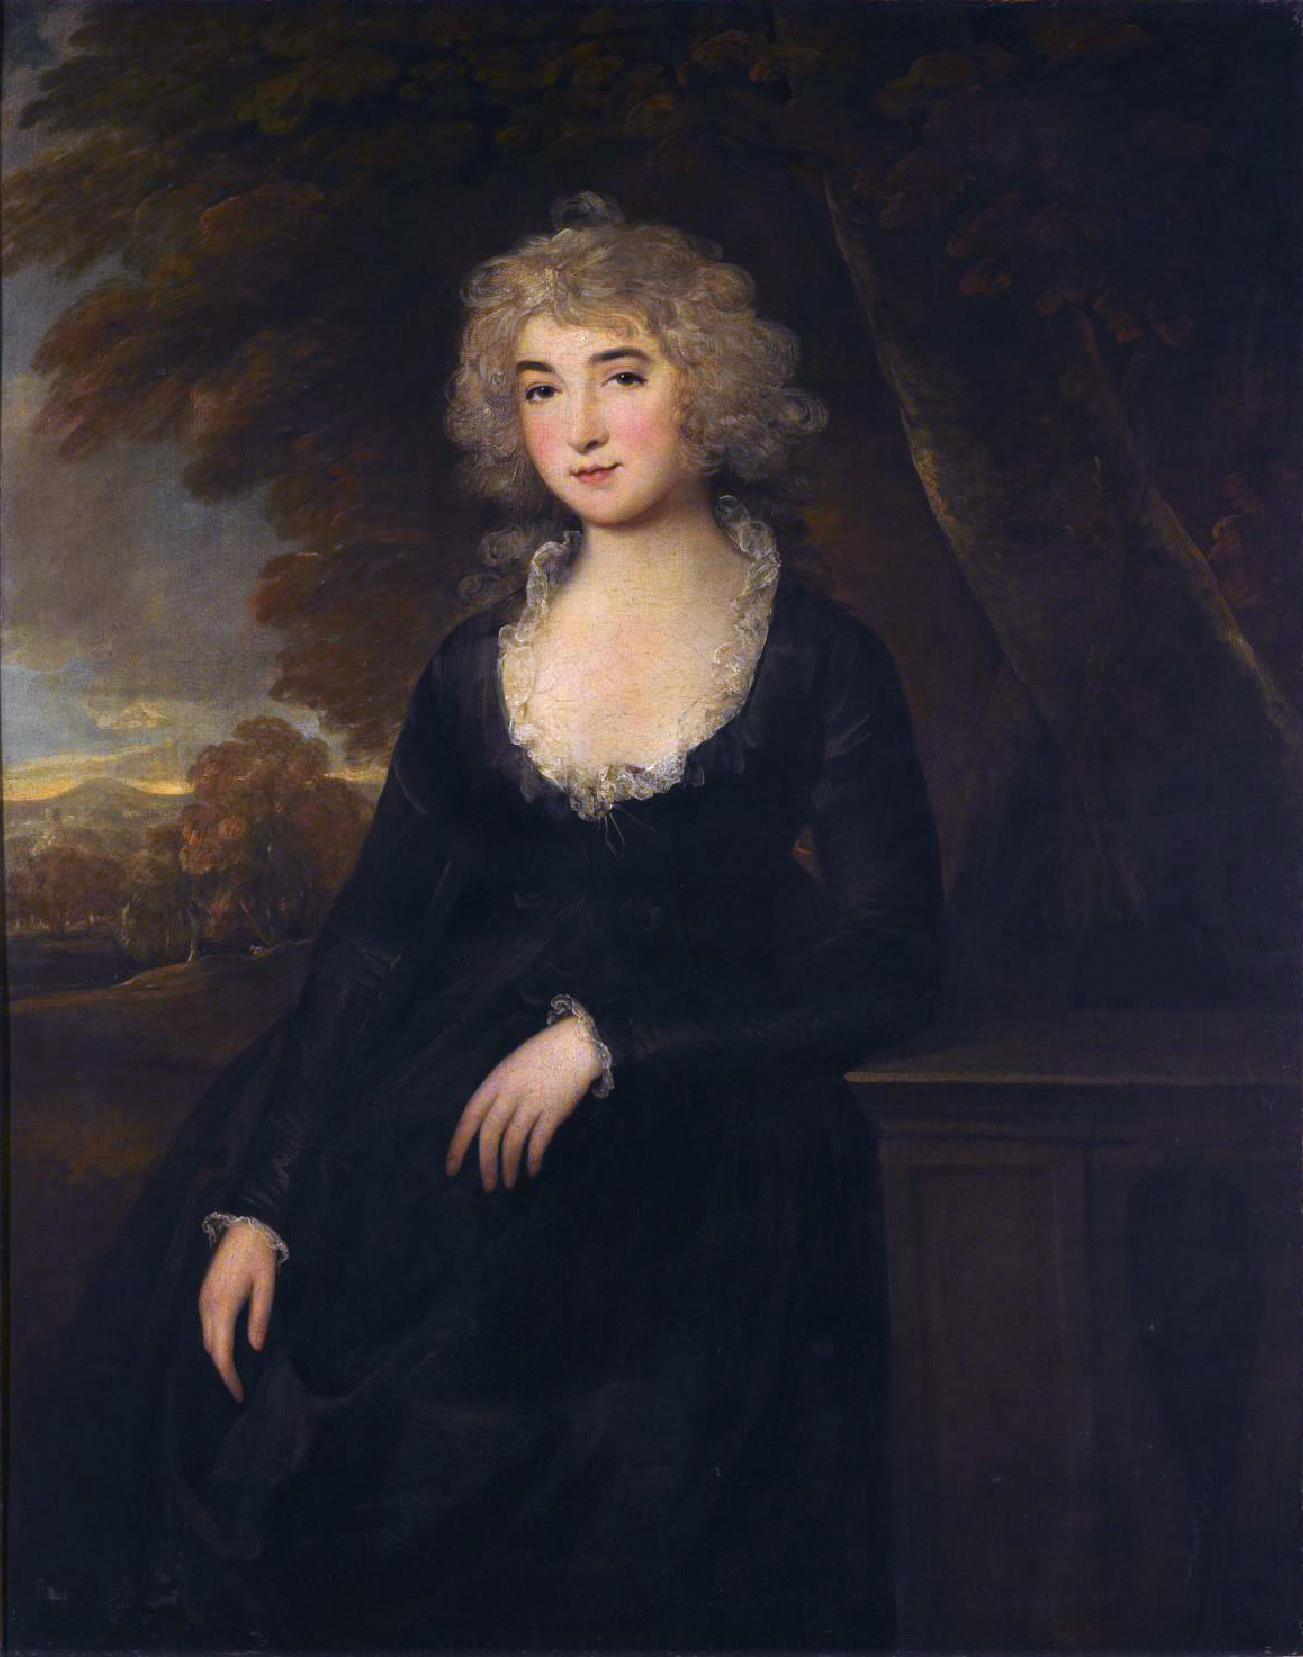 Frances_Villiers%2C_Countess_of_Jersey_%281753-1821%29_by_Thomas_Beach.jpg